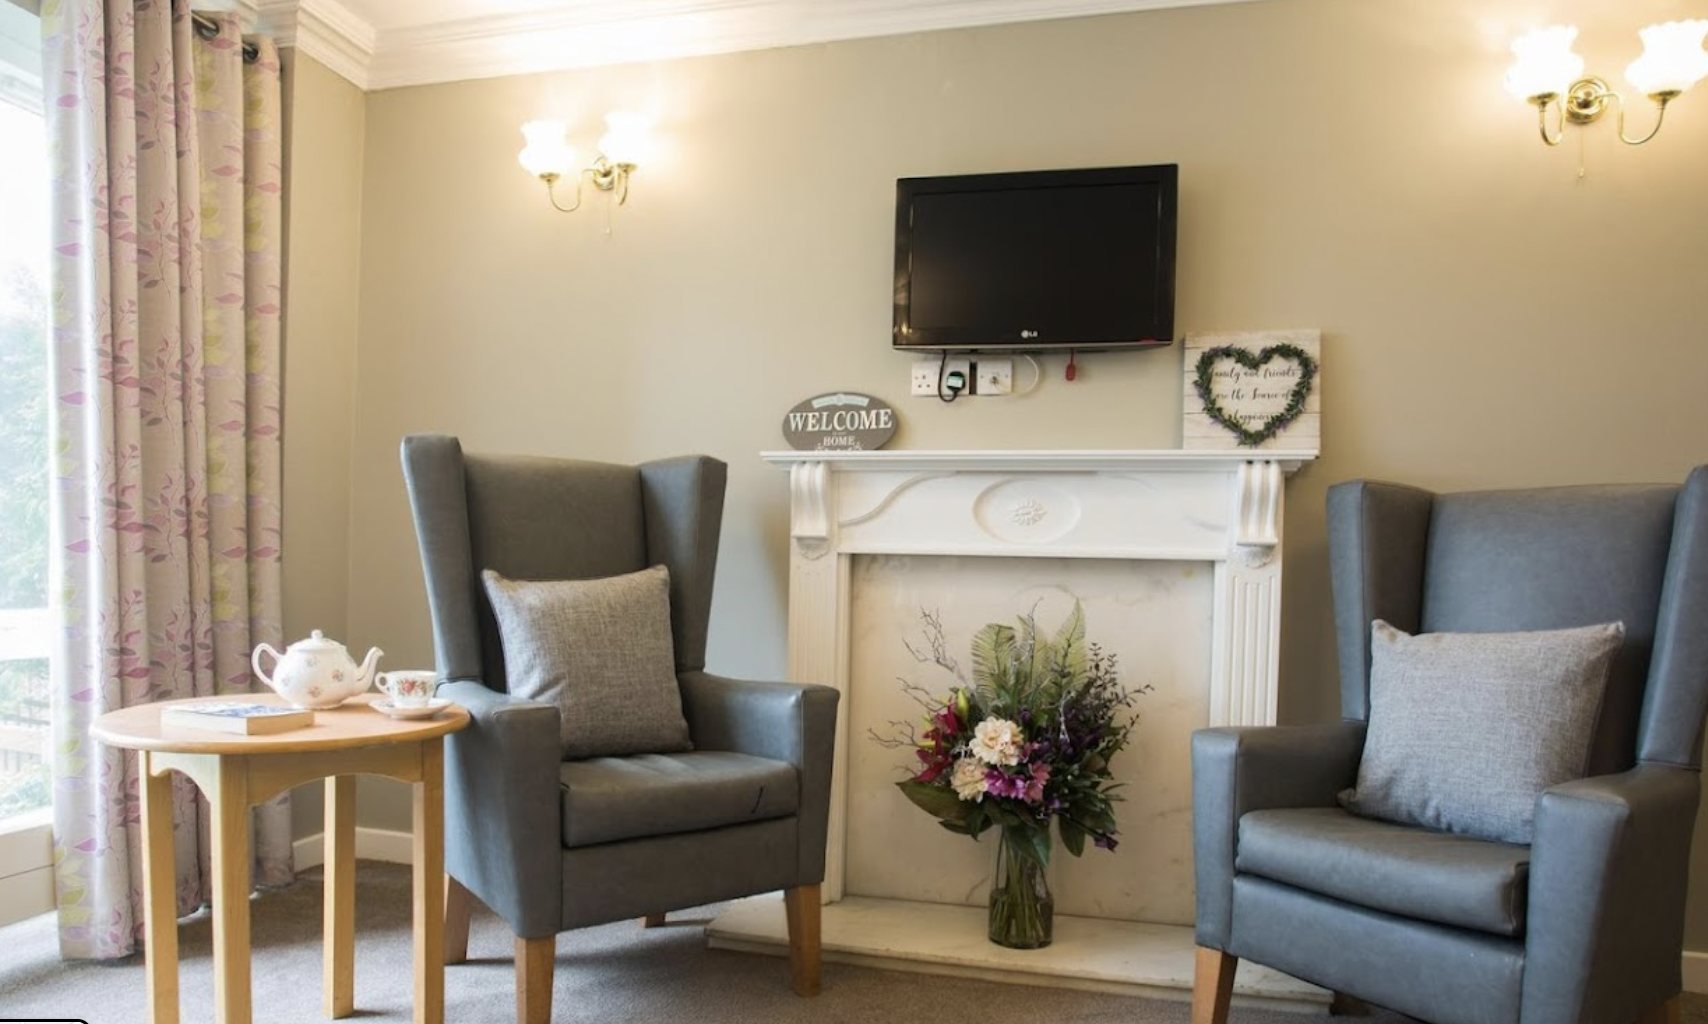 Bupa - Leominster care home 2